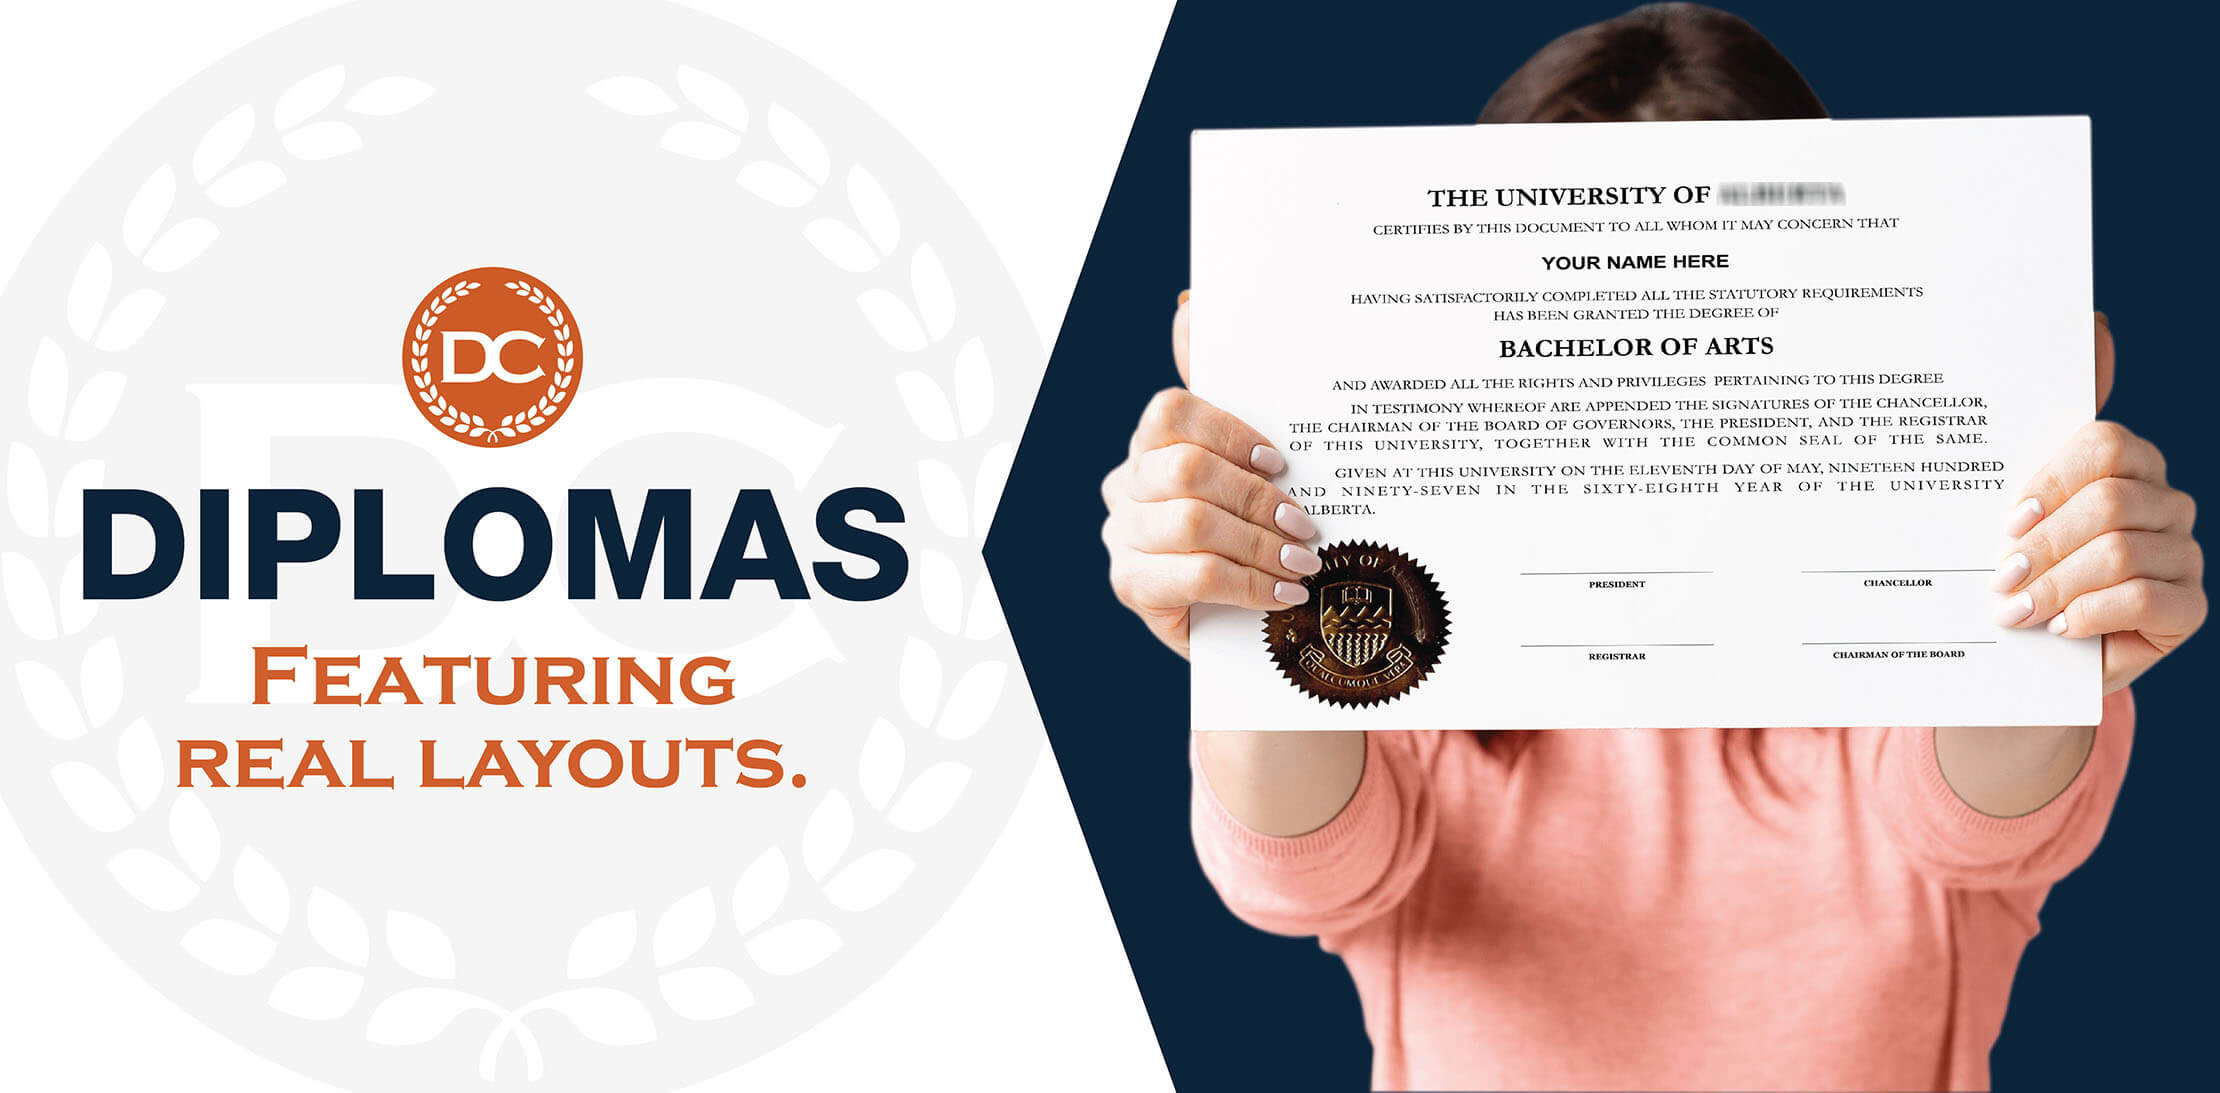 10+ years offering best fake diplomas and degrees! Raised seals and text! 100% satisfaction guaranteed!